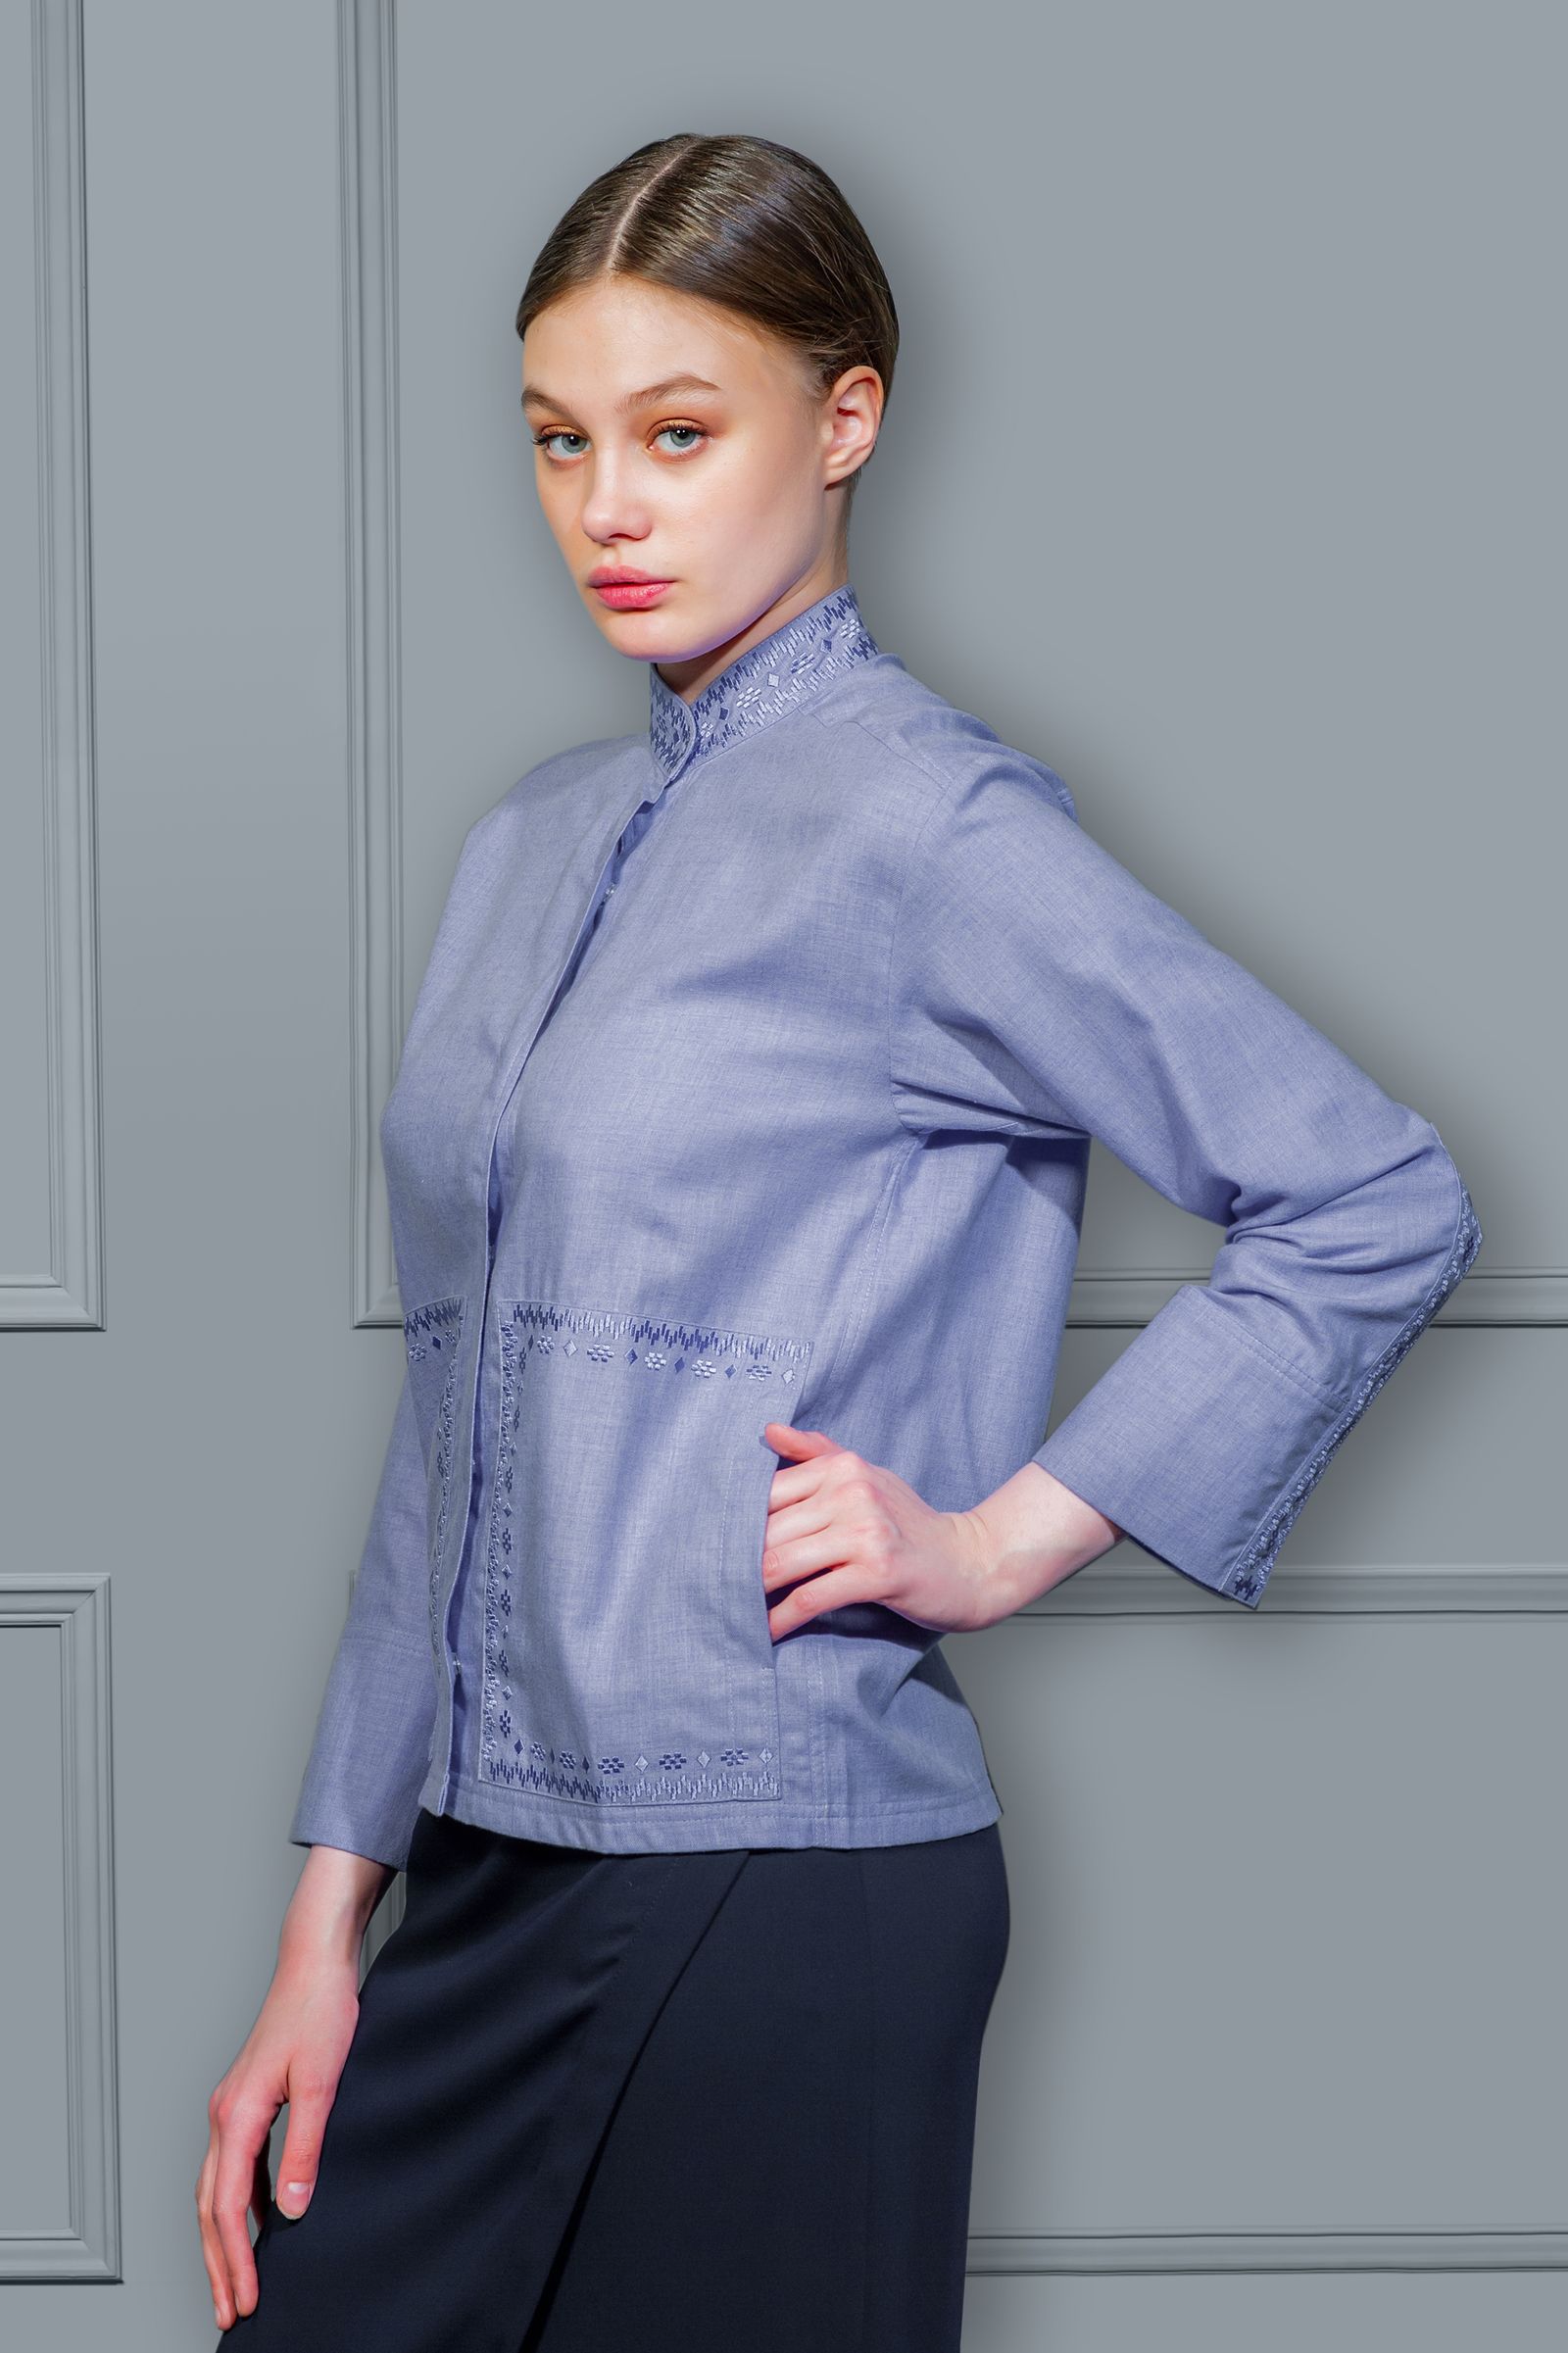 Embroidered blue cotton shirt